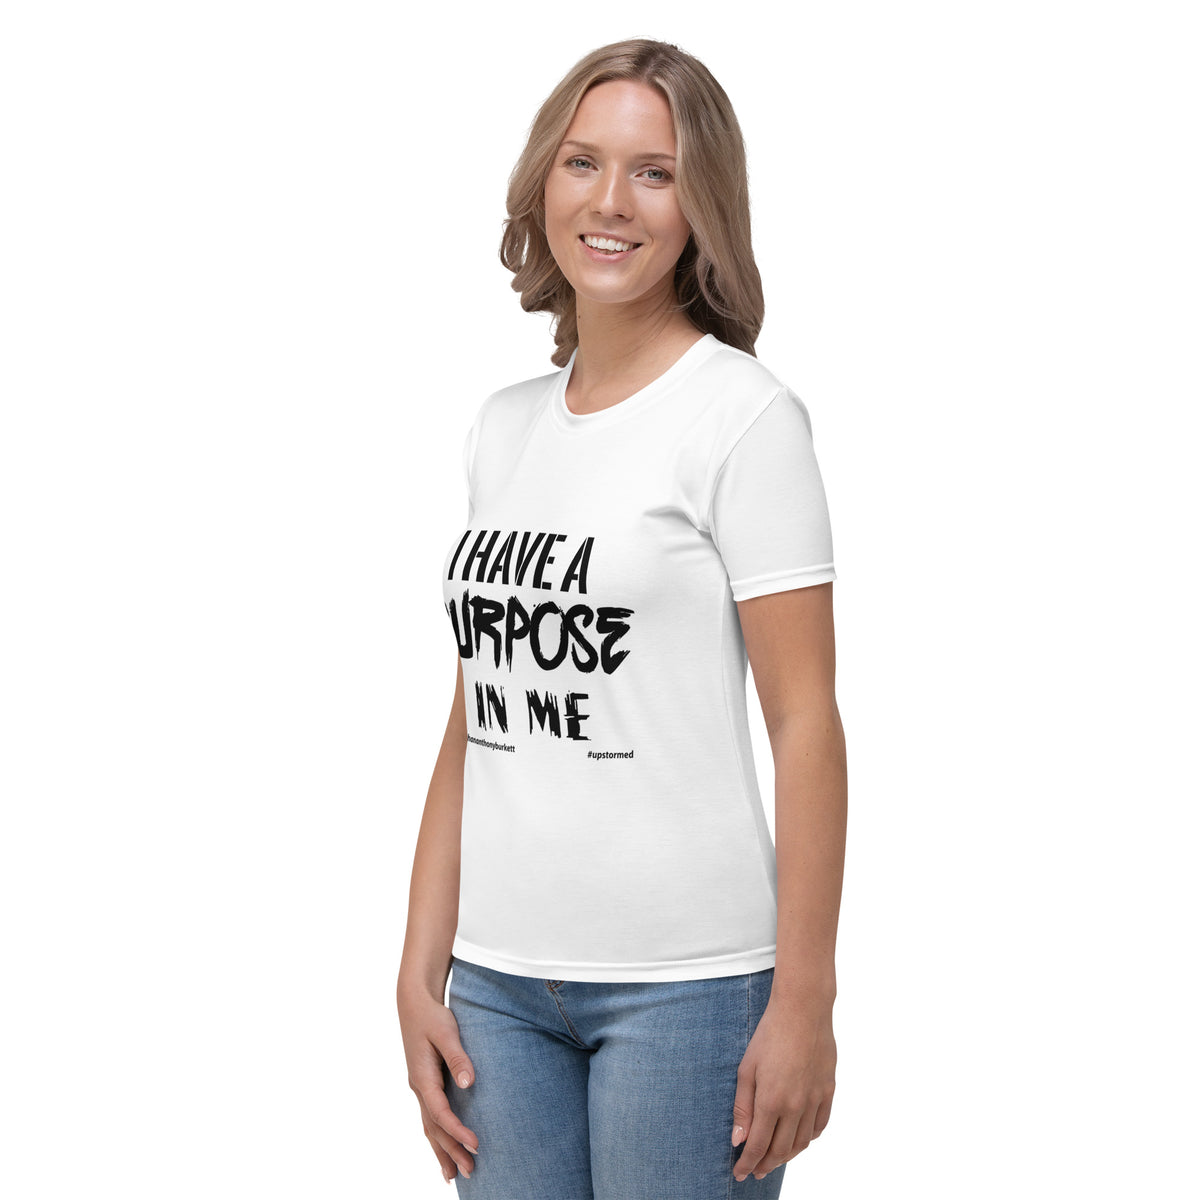 I have A Purpose In Me Women's T-shirt